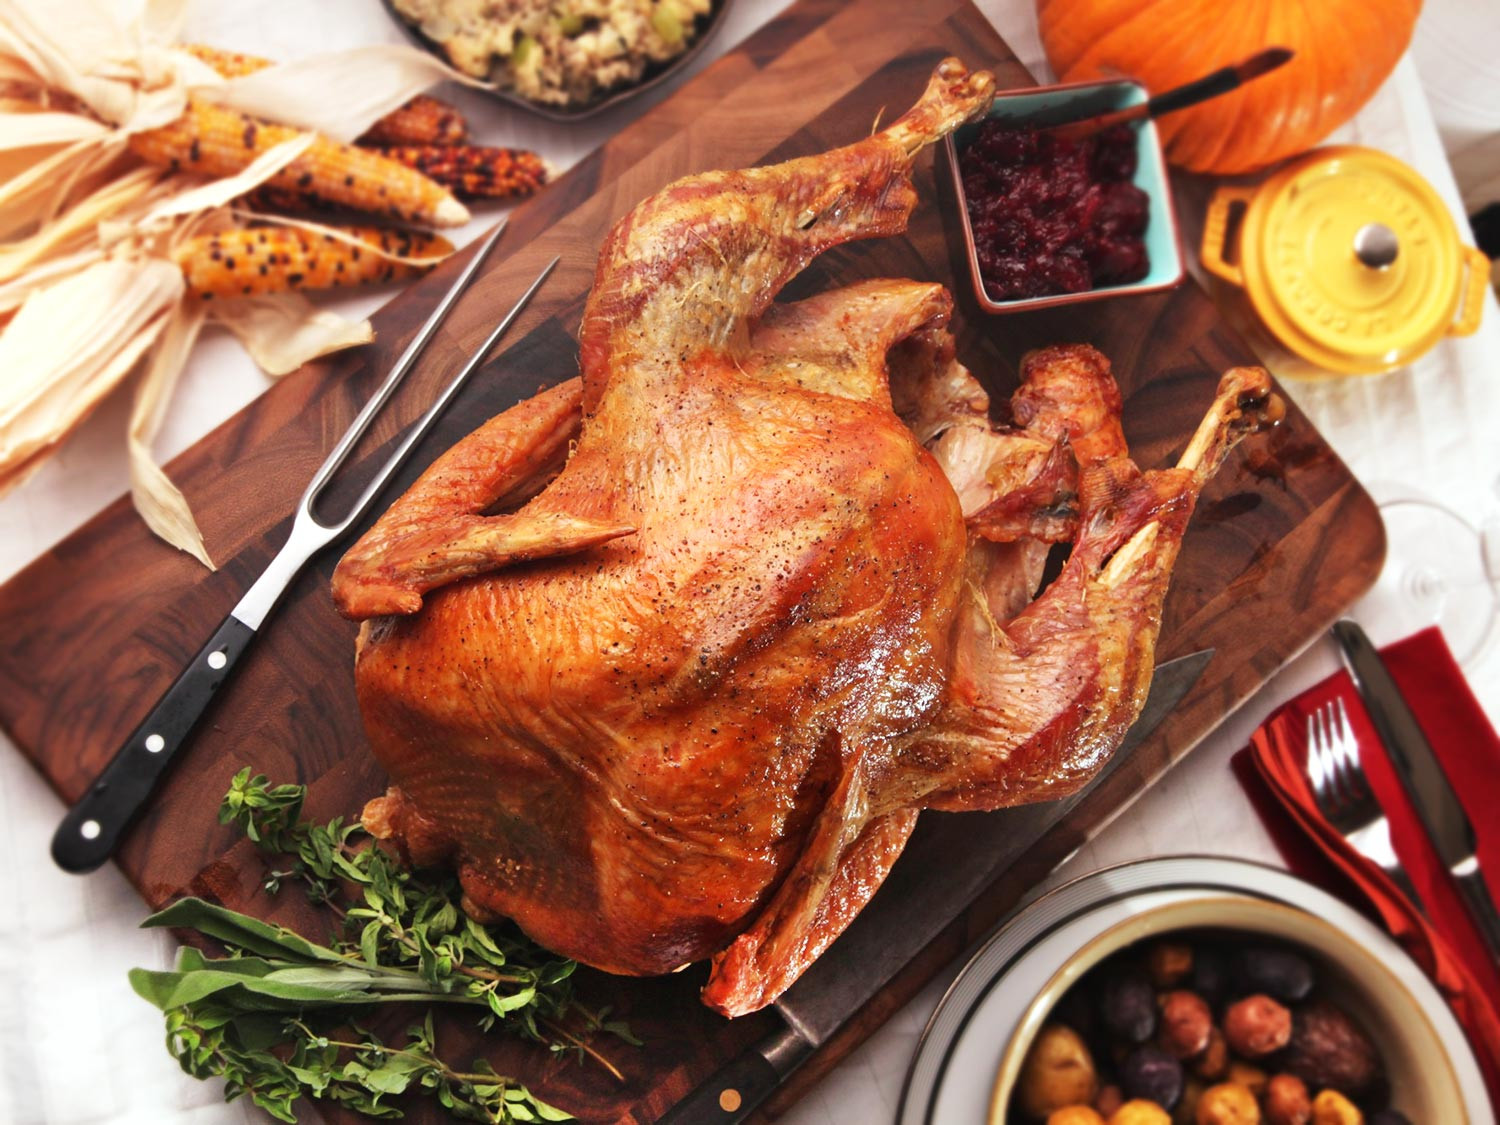 Best Turkey Brands To Buy For Thanksgiving
 The Best Simple Roast Turkey With Gravy Recipe